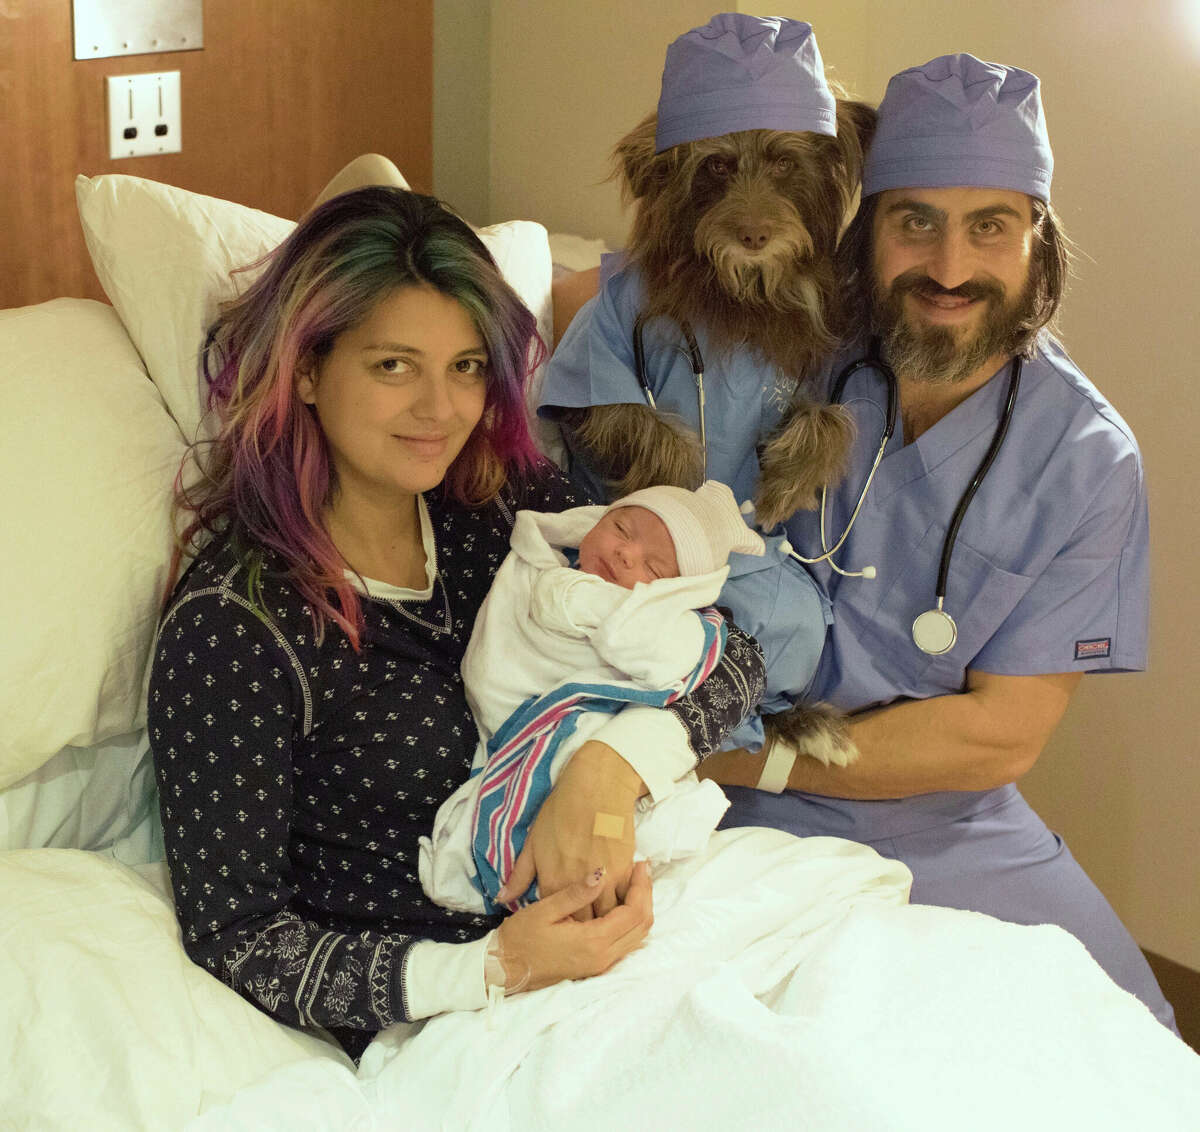 Greenwich residents Chantal Adair and Topher Brophy are celebrating the birth of their first child with their dog Rosenberg, who Adair plans to join the family at the hospital in two sands.  Brophy writes about the surprise planned by his wife in his book "Dad Dog."